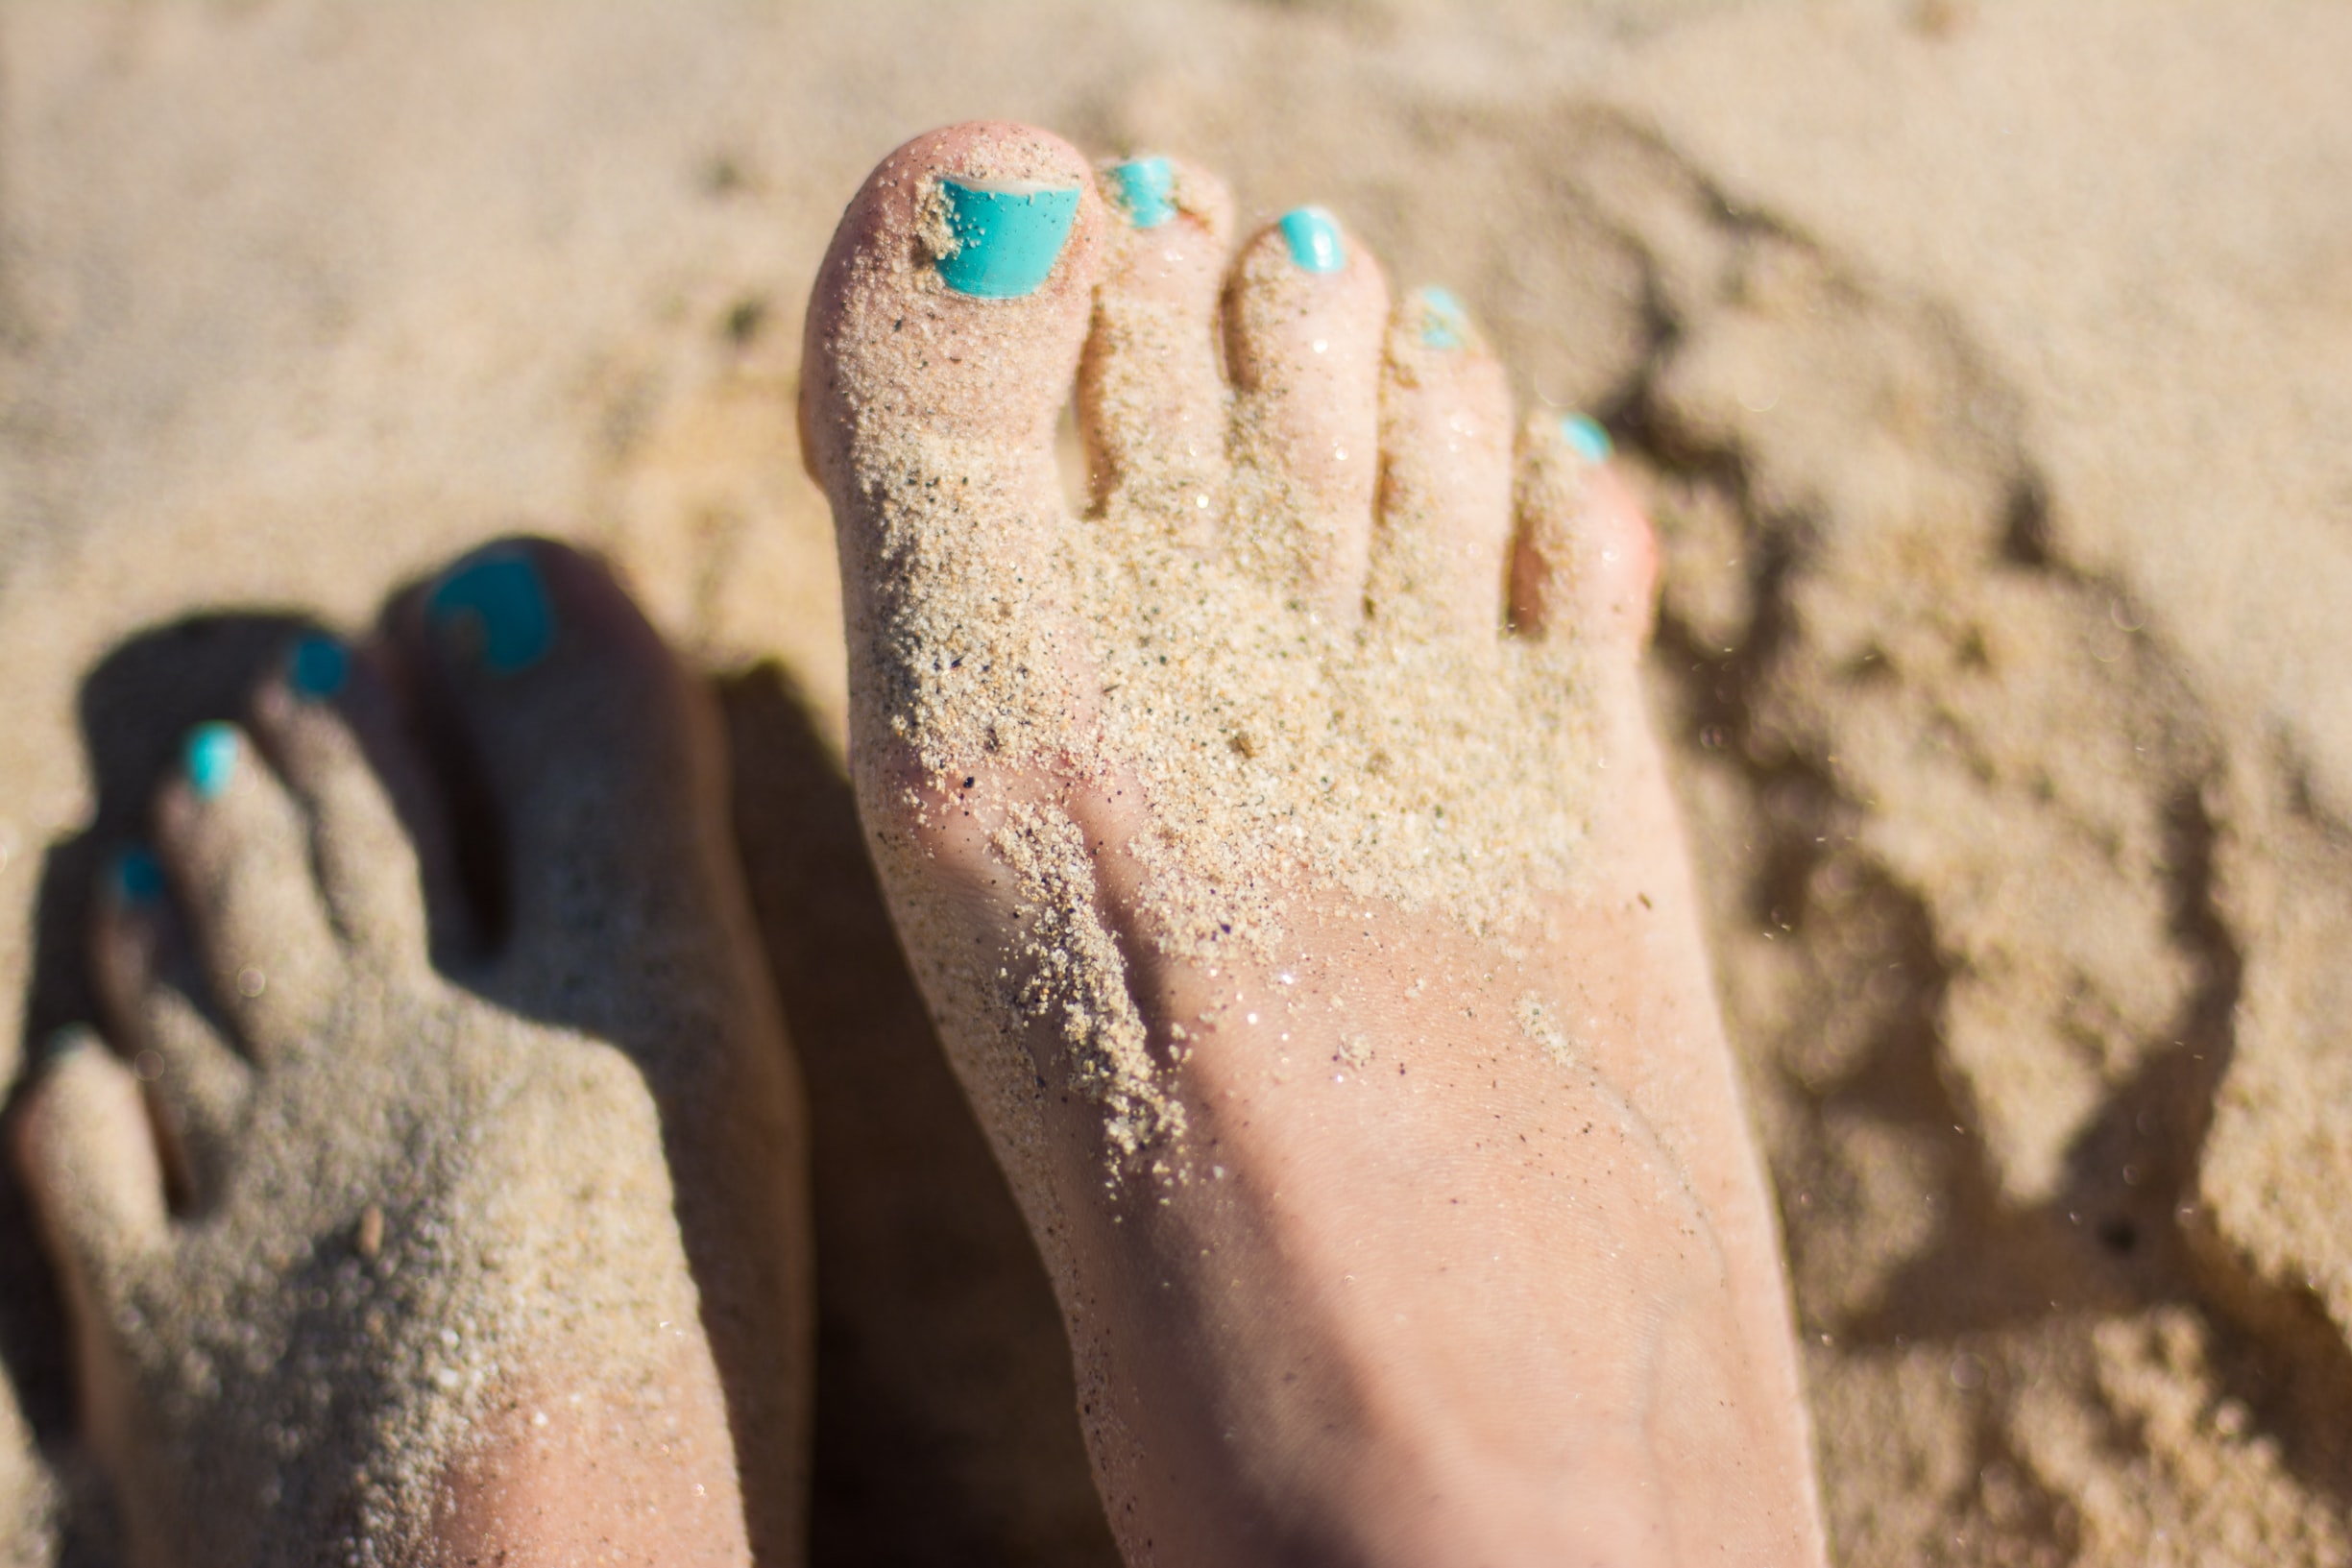 Feet with painted nails covered in sand